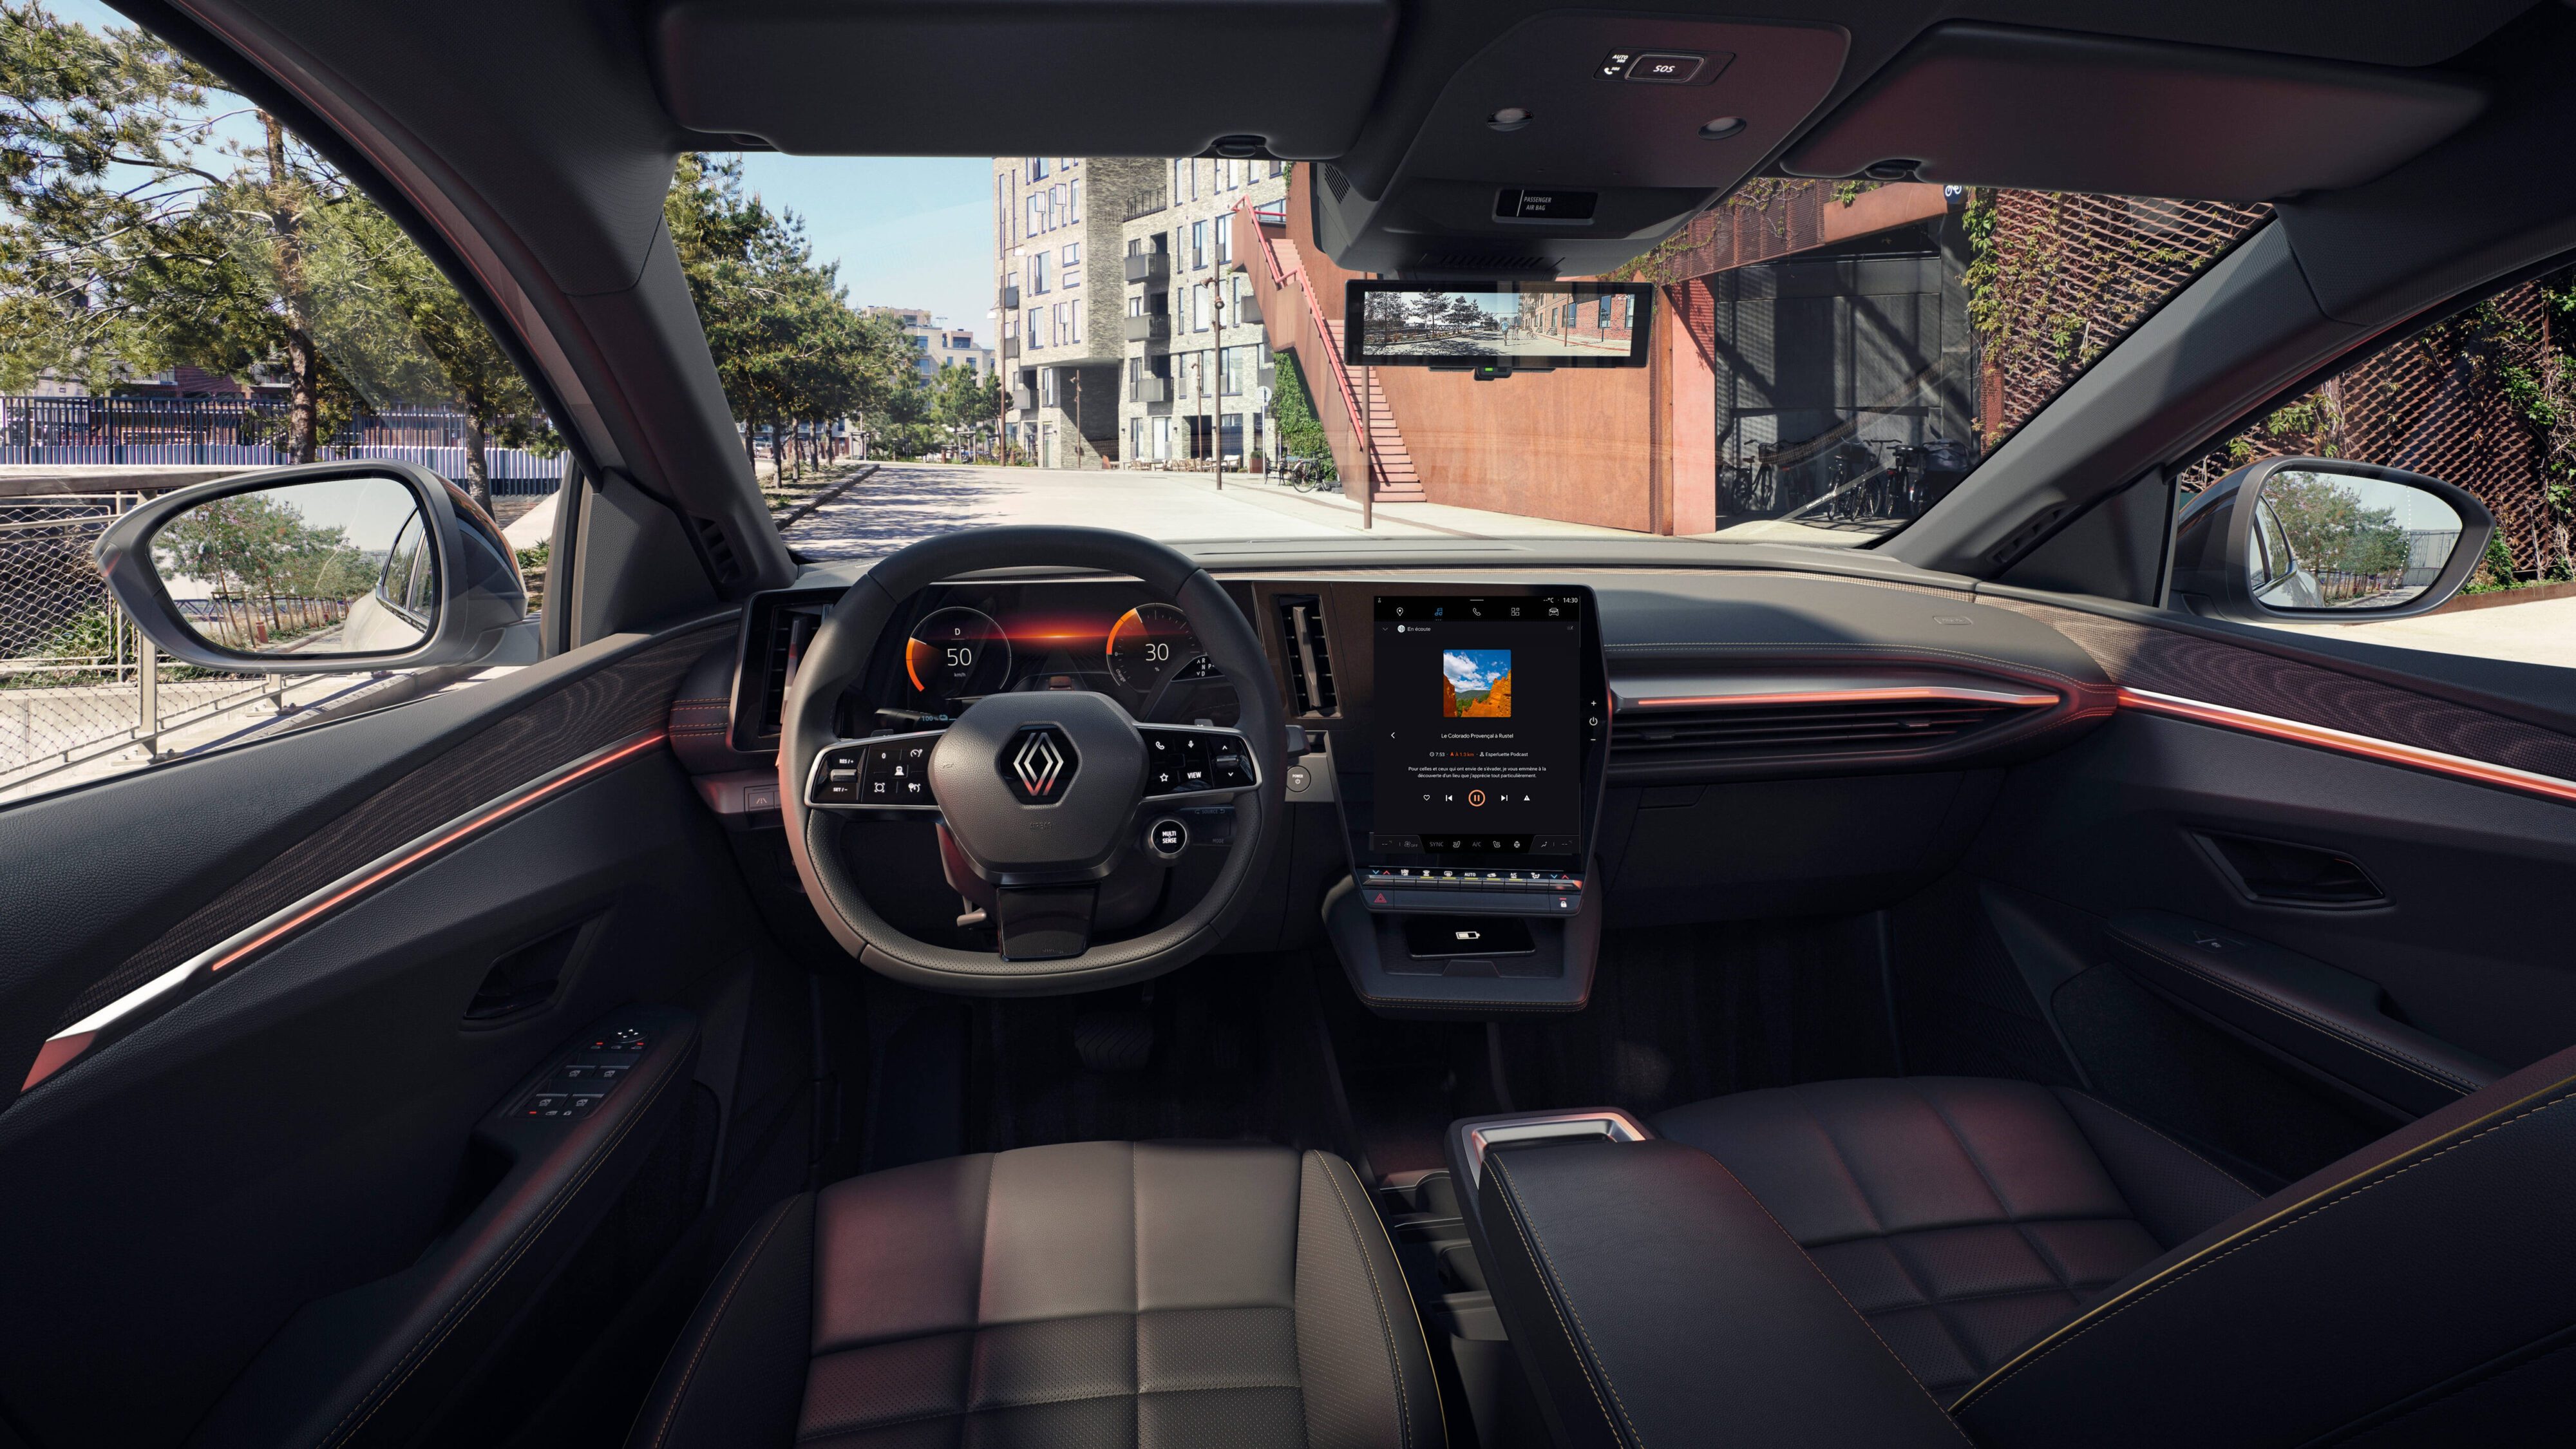 Interior of a Renault with a new partner app open on screen